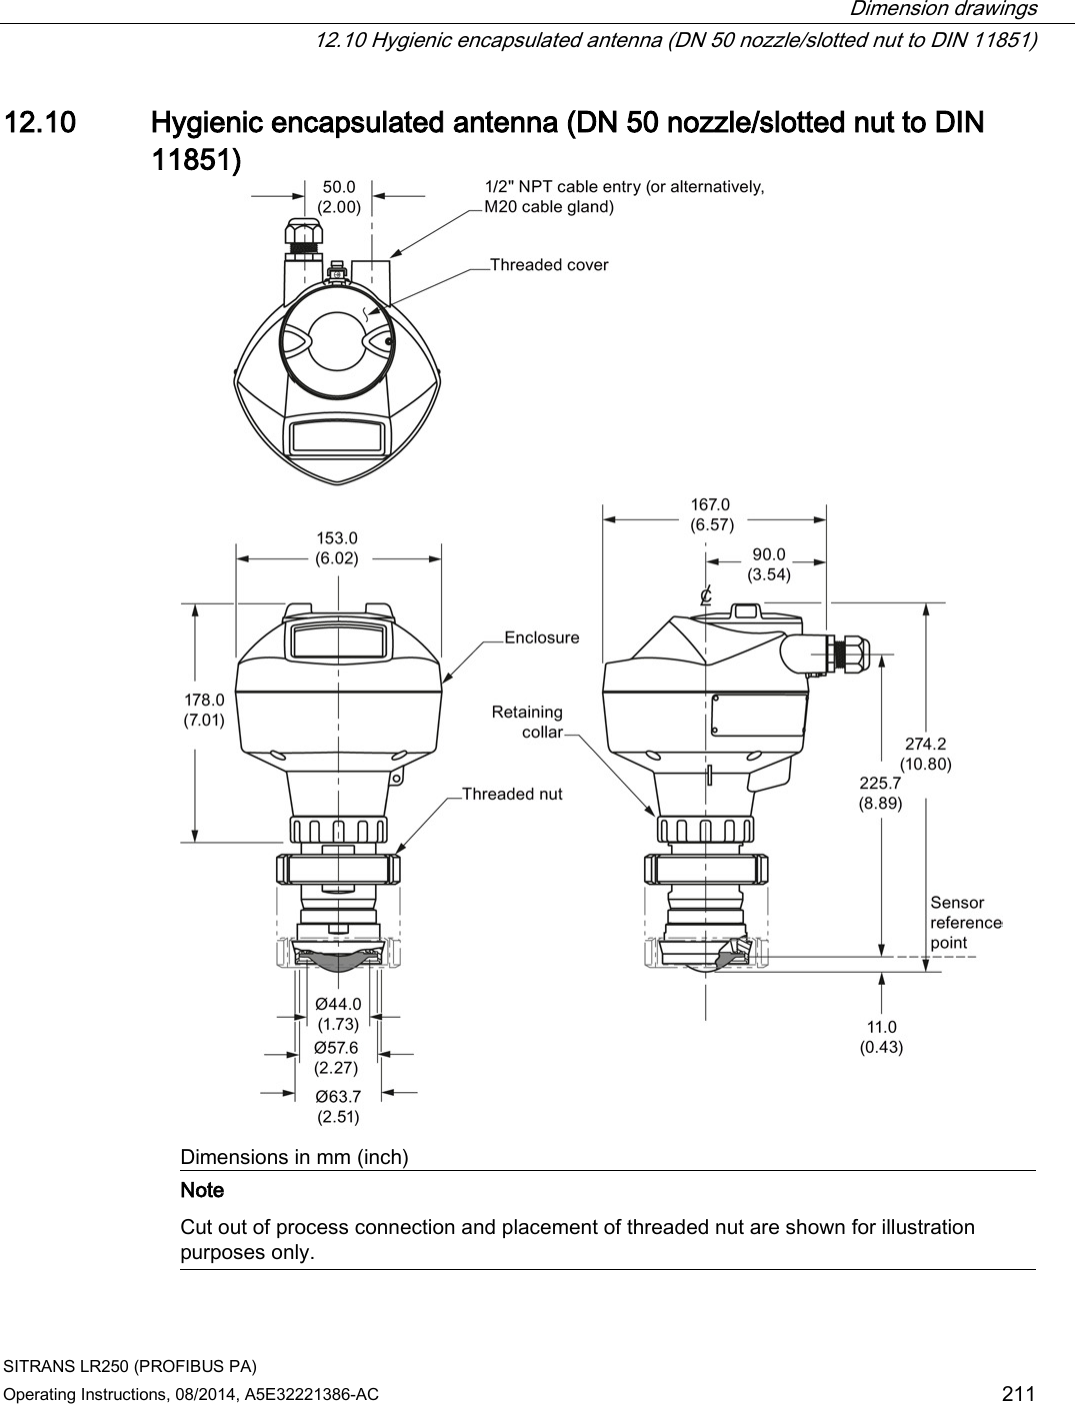  Dimension drawings  12.10 Hygienic encapsulated antenna (DN 50 nozzle/slotted nut to DIN 11851) SITRANS LR250 (PROFIBUS PA) Operating Instructions, 08/2014, A5E32221386-AC 211 12.10 Hygienic encapsulated antenna (DN 50 nozzle/slotted nut to DIN 11851)  Dimensions in mm (inch)  Note Cut out of process connection and placement of threaded nut are shown for illustration purposes only.  